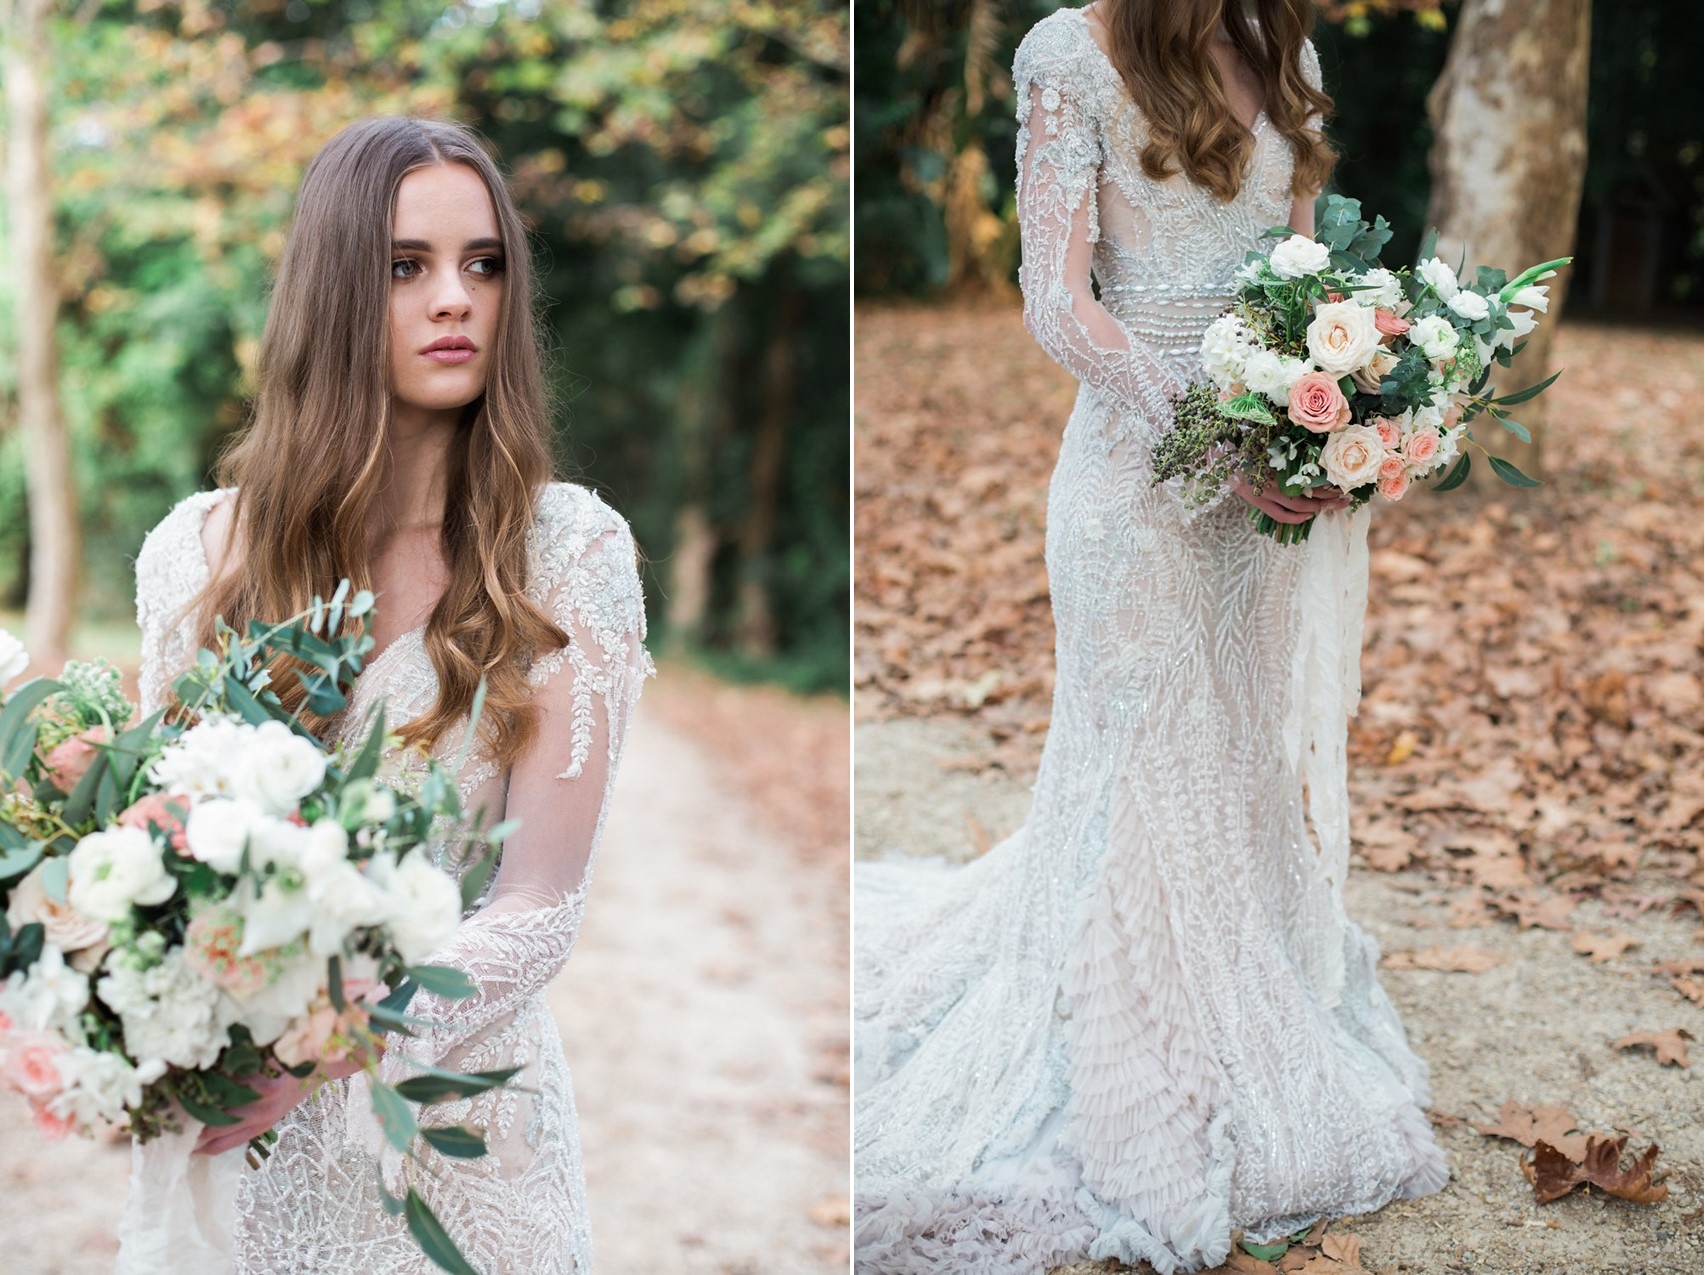 Pretty Fall Wedding Inspiration in Pastels // Photography ~ White Images